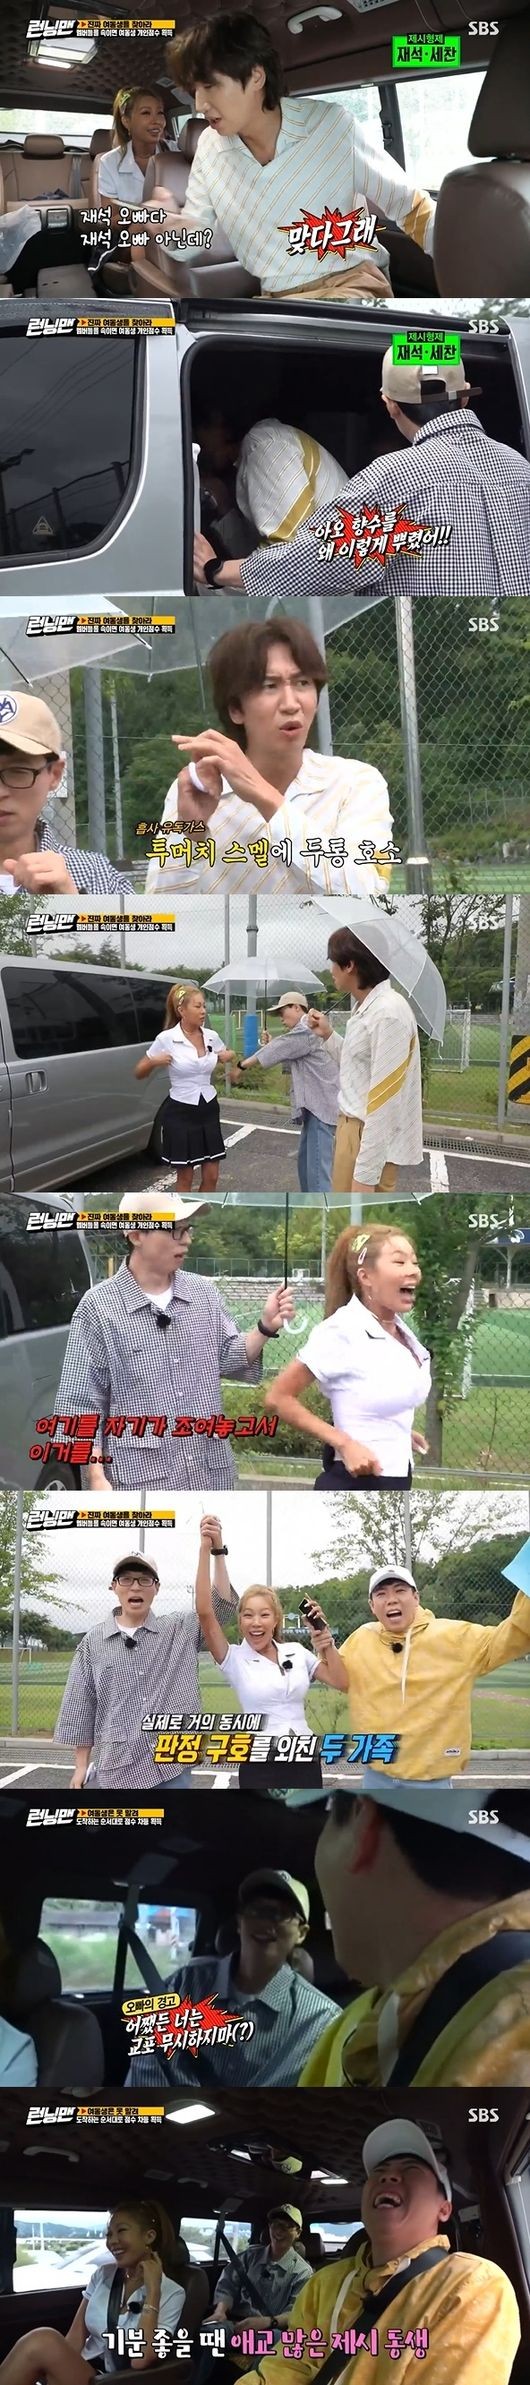 Jessie caught the eye with her remarkable performance from Running Man to the last Wheat flour penalty.On SBS Running Man broadcasted on the afternoon of the afternoon, Jessie played with Yoo Jae-Suk and Chemie of the hall to Wheat flour penalty.On this day, Running Man was decorated with My sister can not get rid of Race, and Jessie, Jeon Sommy, Mama Musola and Lee Youngji appeared as guests.Two members and a sister guest teamed up, Lee Young-ji was given a team of Haha and Kwangsu, Jessie was given a commission card of Yoo Jae-Suk and Yang Se-chan, and Kim Jong-guk and Ji Seok-jin, Sola was Song Ji-hyo and Jeon So-mi and his brother.The sister can earn a personal score if she cheats on Running Man members, and Jessie has used her hair to deceive the members.Lee Kwang-soo came to Jessie, followed by Yoo Jae-Suk.Yoo Jae-Suk called Jessies real name and said, Why did Hyunju soak so much perfume? And complained of headaches. Do you say that you are choking after your uniform?Jessie held the hands of Yoo Jae-Suk and Lee Kwang-soo and shouted We are brothers, but the real brothers were Yoo Jae-Suk and Yang Se-chan.Jessie gets personal score as she cheats on membersAt the end of the twists and turns, Yoo Jae-Suk and Yang Se-chan met Jessie, and moved in the same car; Jessie said, Anyway, its nice to meet you.I like to be a Jae Seok brother, and Yoo Jae-Suk advised, Anyway, Sechan does not ignore you, Jessie said, Sechan ignored me that day.I was hurt so much, Yang Se-chan confessed, saying, I was hurt because I could not understand because you were English. Yoo Jae-Suk introduced the guest and asked, Does the solar hairstyle go into the historical drama today? and Jessie said, This is a real Korean style, its more beautiful to do this.Yoo Jae-Suk said, Stay still ~ come on, and Jessie said, I do not want to talk about it.Jessie approached Yang Se-chan while presenting the choreography of the new song Snowy Sister, and Yang Se-chan, who was surprised by the powerful force, was surprised and laughed around.Jessie also said, Actually, it is the youngest of two boys and one girl. I do not know what one of them is doing, but it is not a white man.Another is working for a big American company. My brothers have been growing up since I was a child. You said, Youll be fine.Jessie performed several commissions with Yoo Jae-Suk and Yang Se-chan, but won the penalty, finishing third with a low academic score, and stood in front of the Wheat Flour Door.Only one in three was hit by a Wheat flour, and only Jessie, who was on the second, was hit by a Wheat flour bomb from head to toe.Lee Kwang-soo blew huh-huh-huh to shake off Jessies Wheat flour, but at this point Jessie screamed huh-huh-huh-huh.In addition, the crew who did not understand the atmosphere asked, Well, a comment ... and Jessie laughed until the end, saying, It sounds like a testimonial.Running Man screen captures